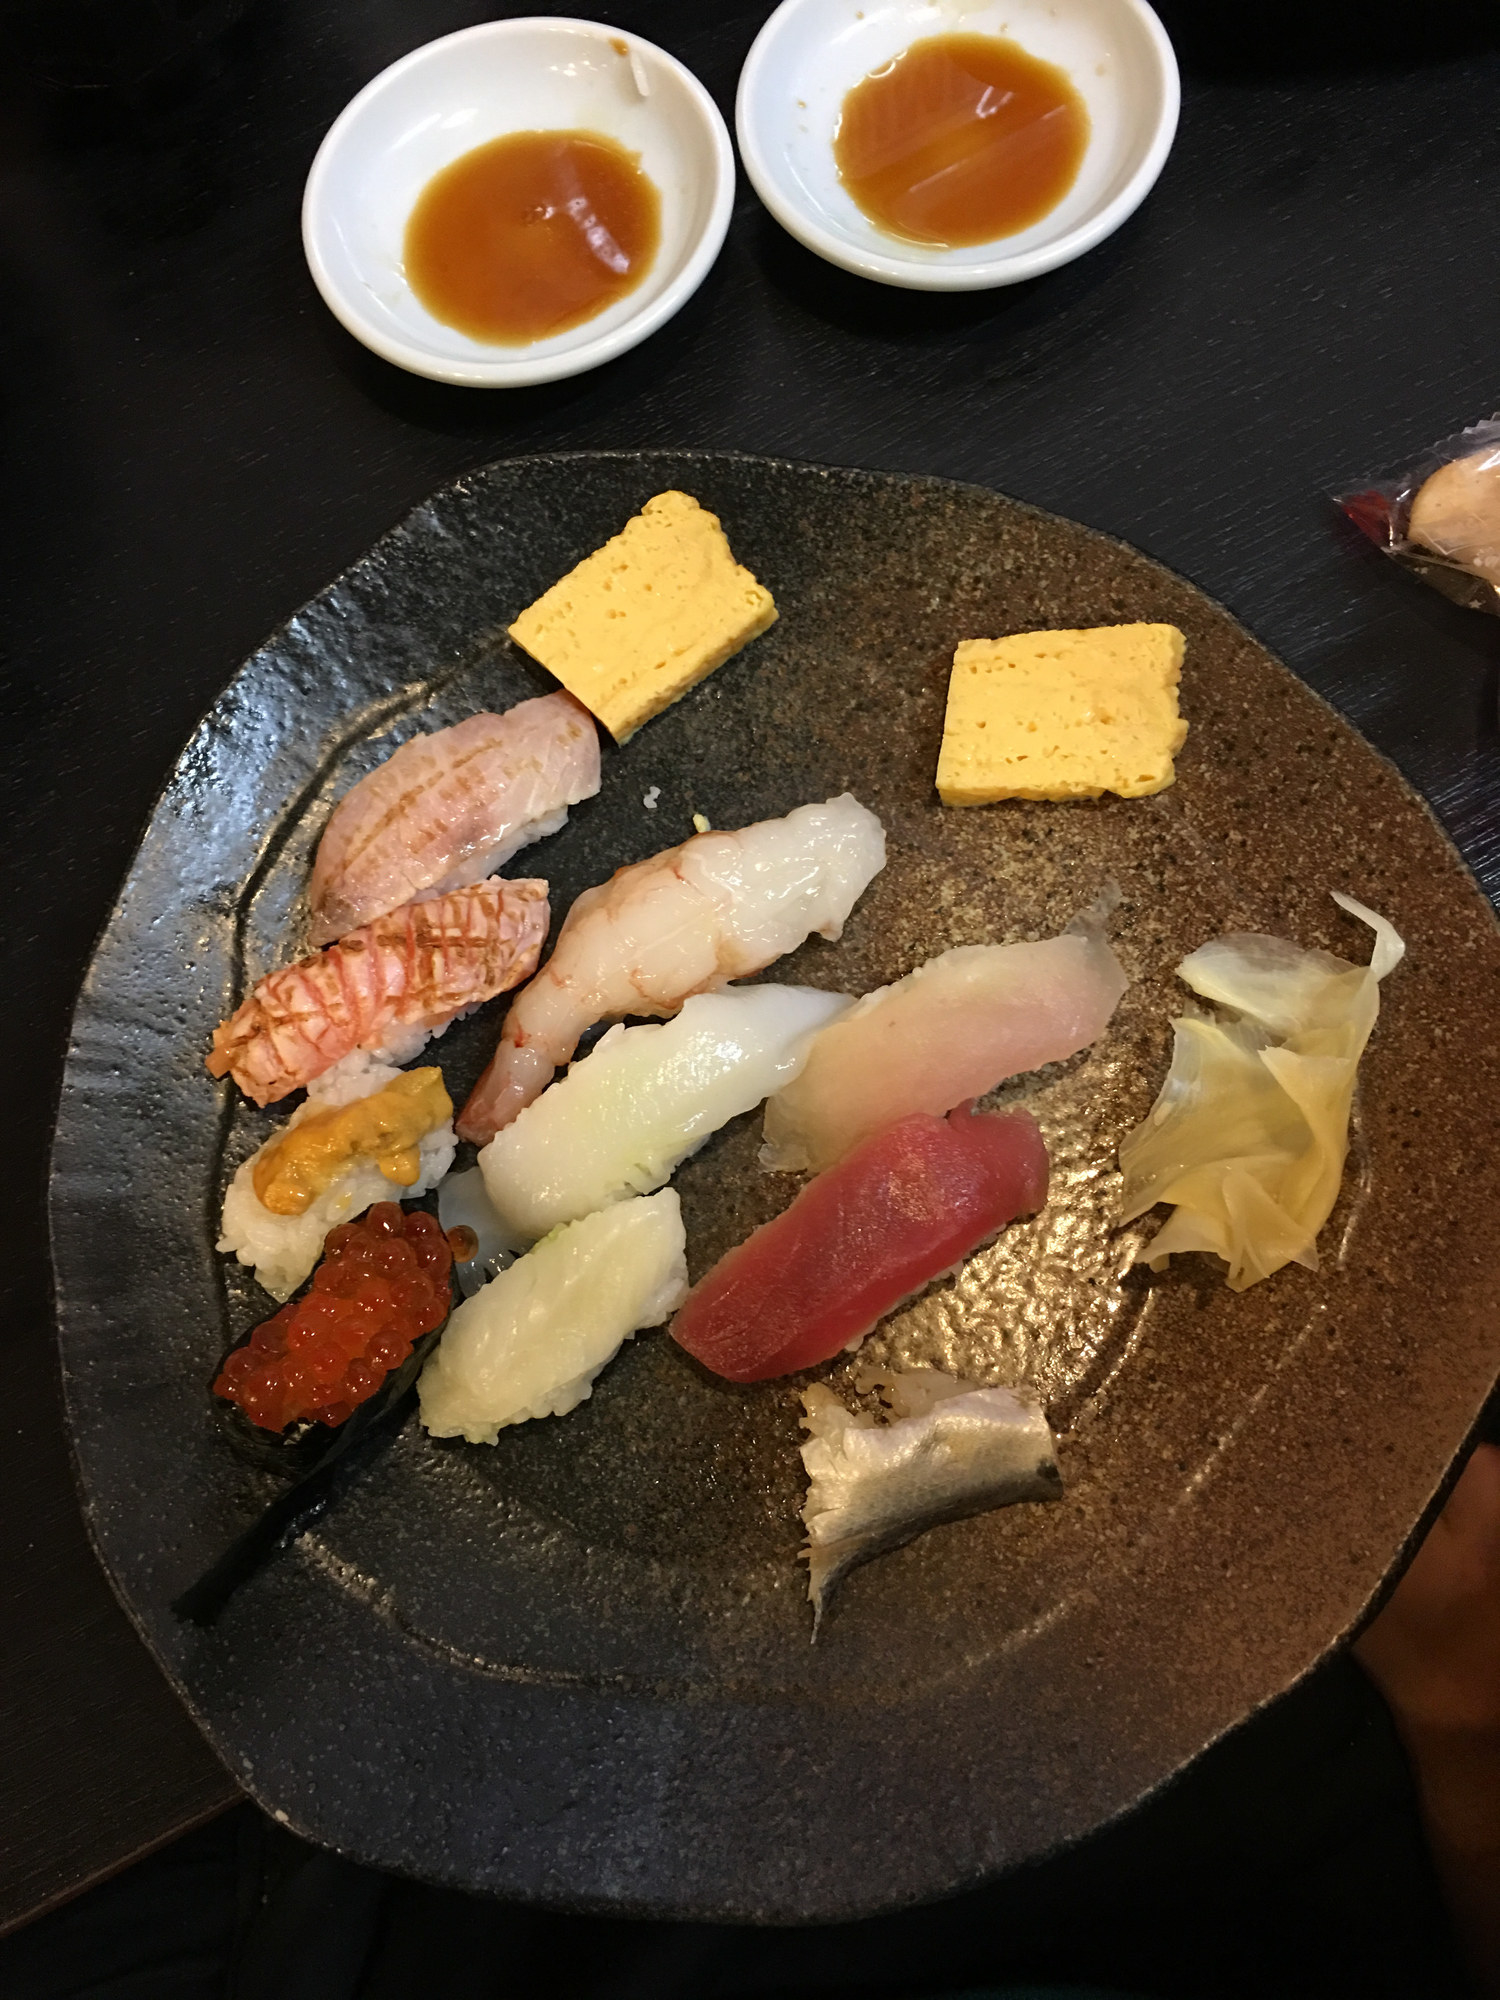 A plate of sushi